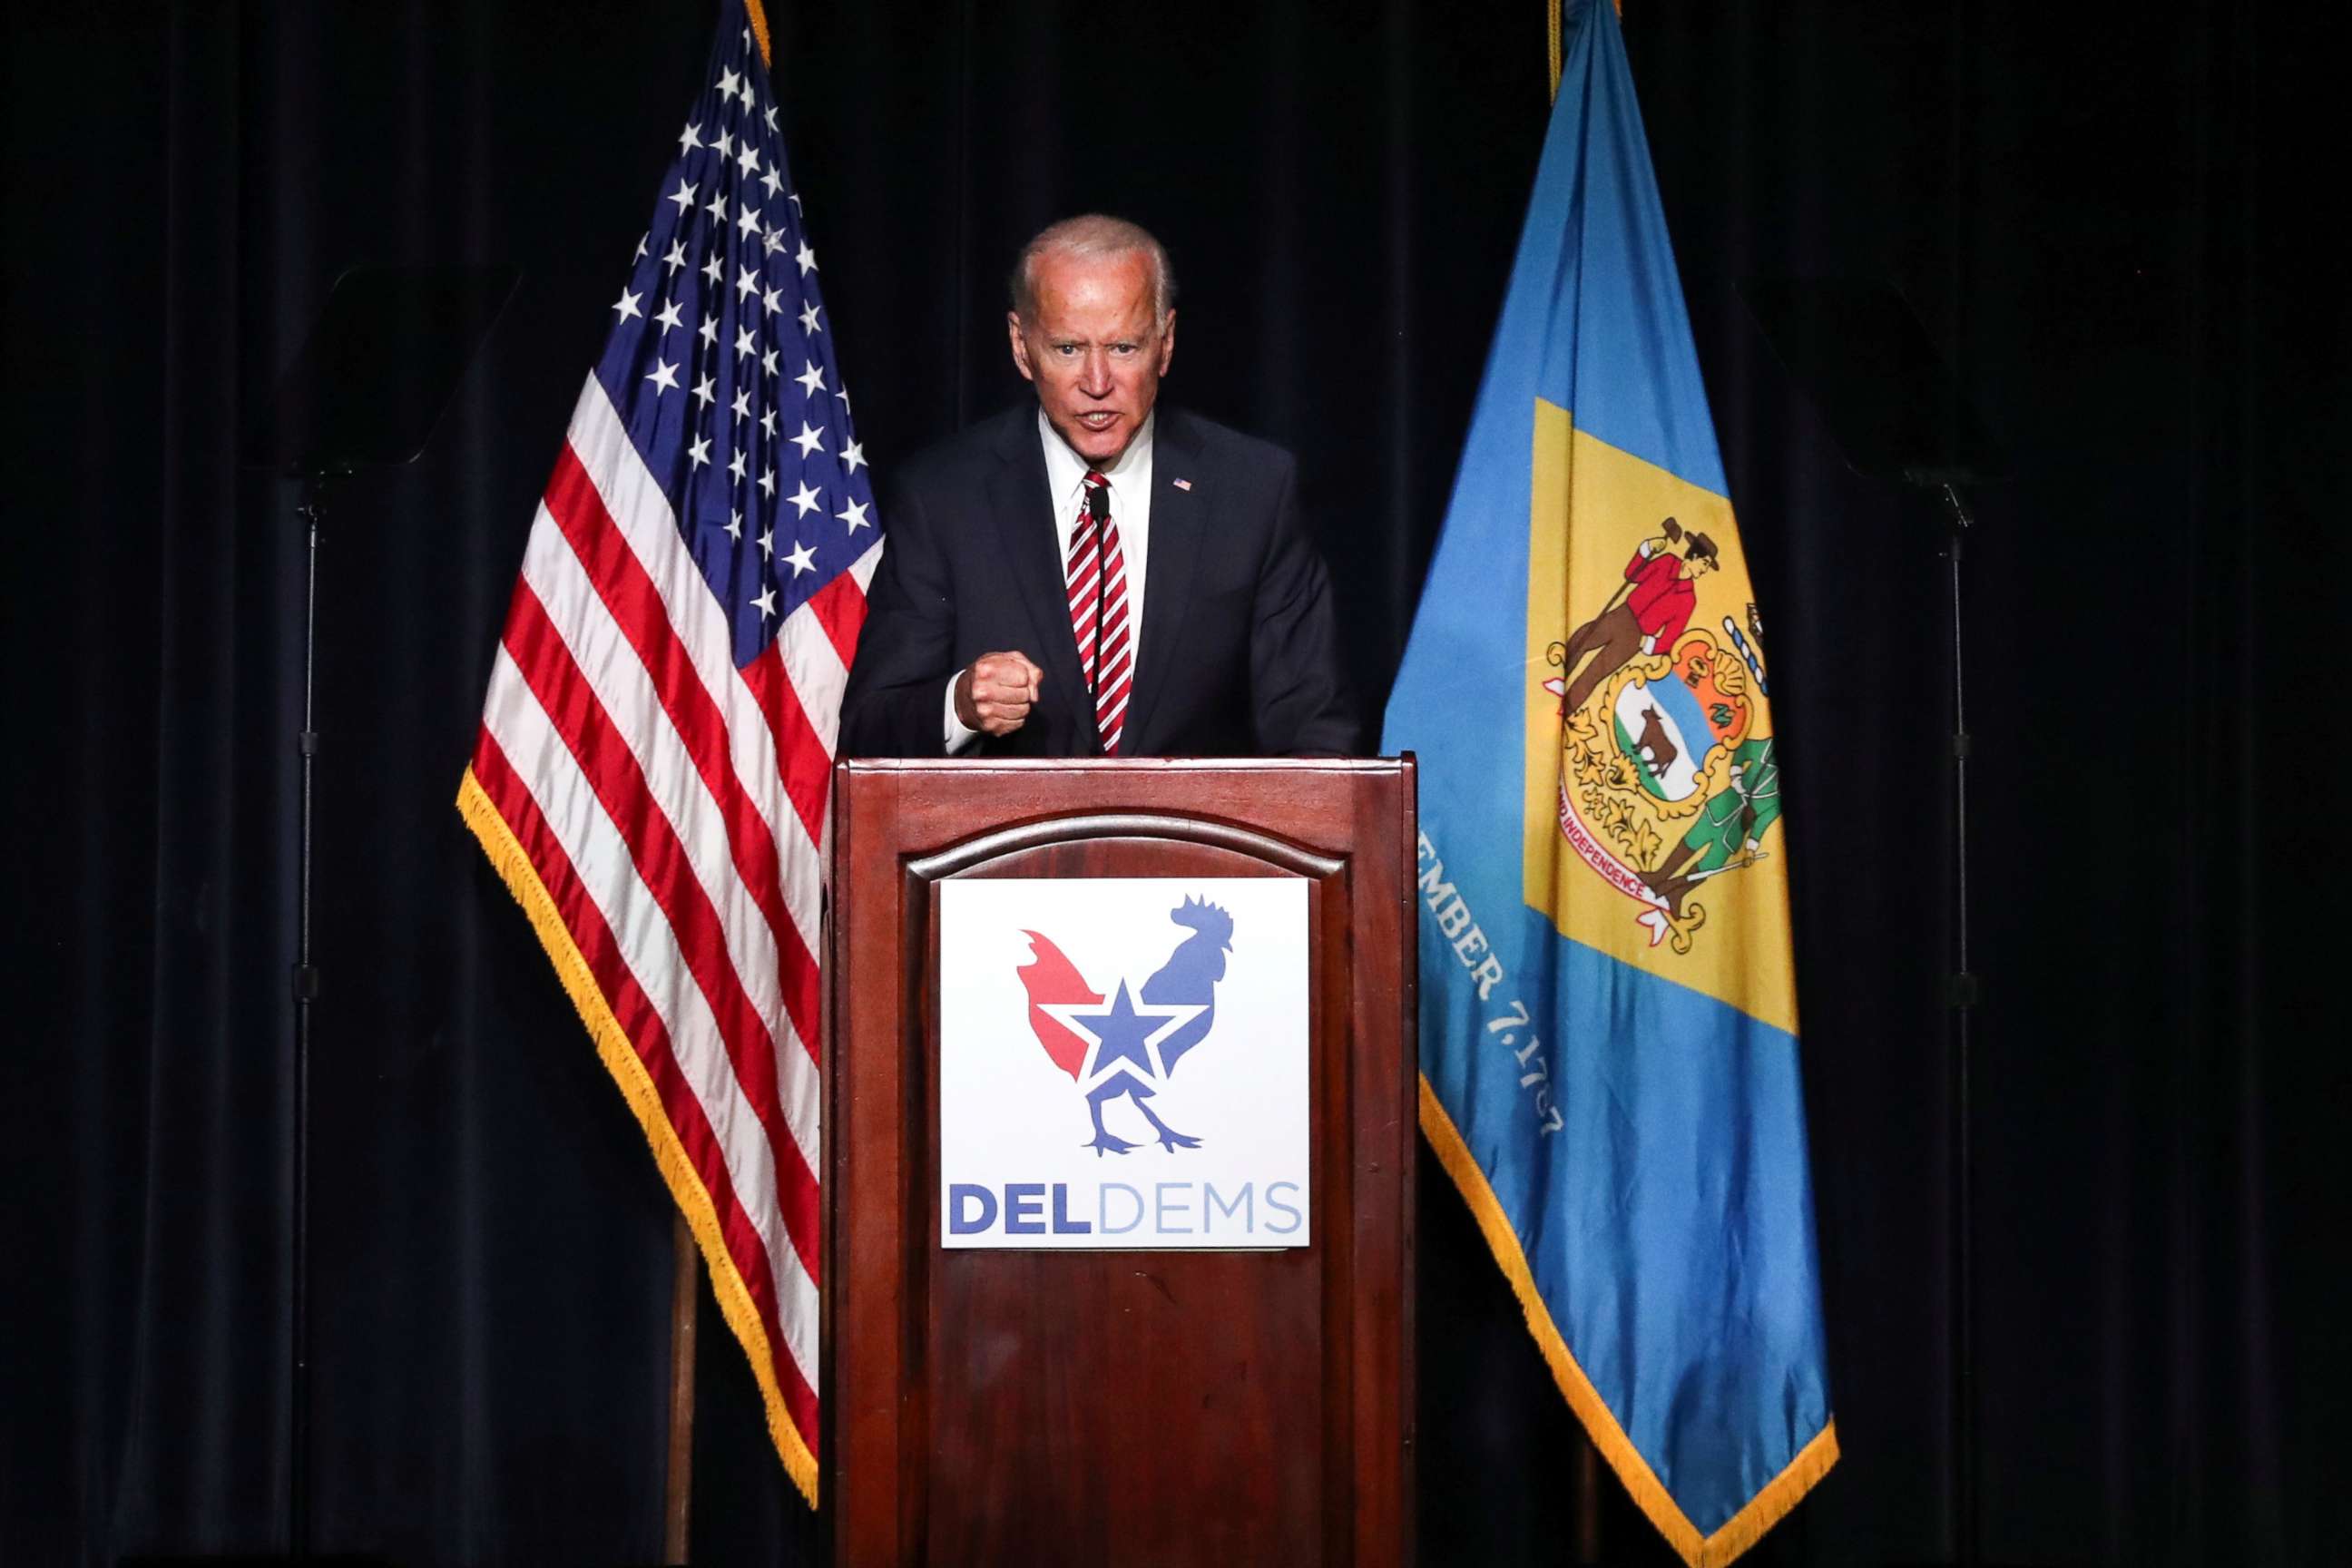 PHOTO: Former Vice President Joe Biden delivers remarks at the First State Democratic Dinner in Dover, Del., March 16, 2019.  